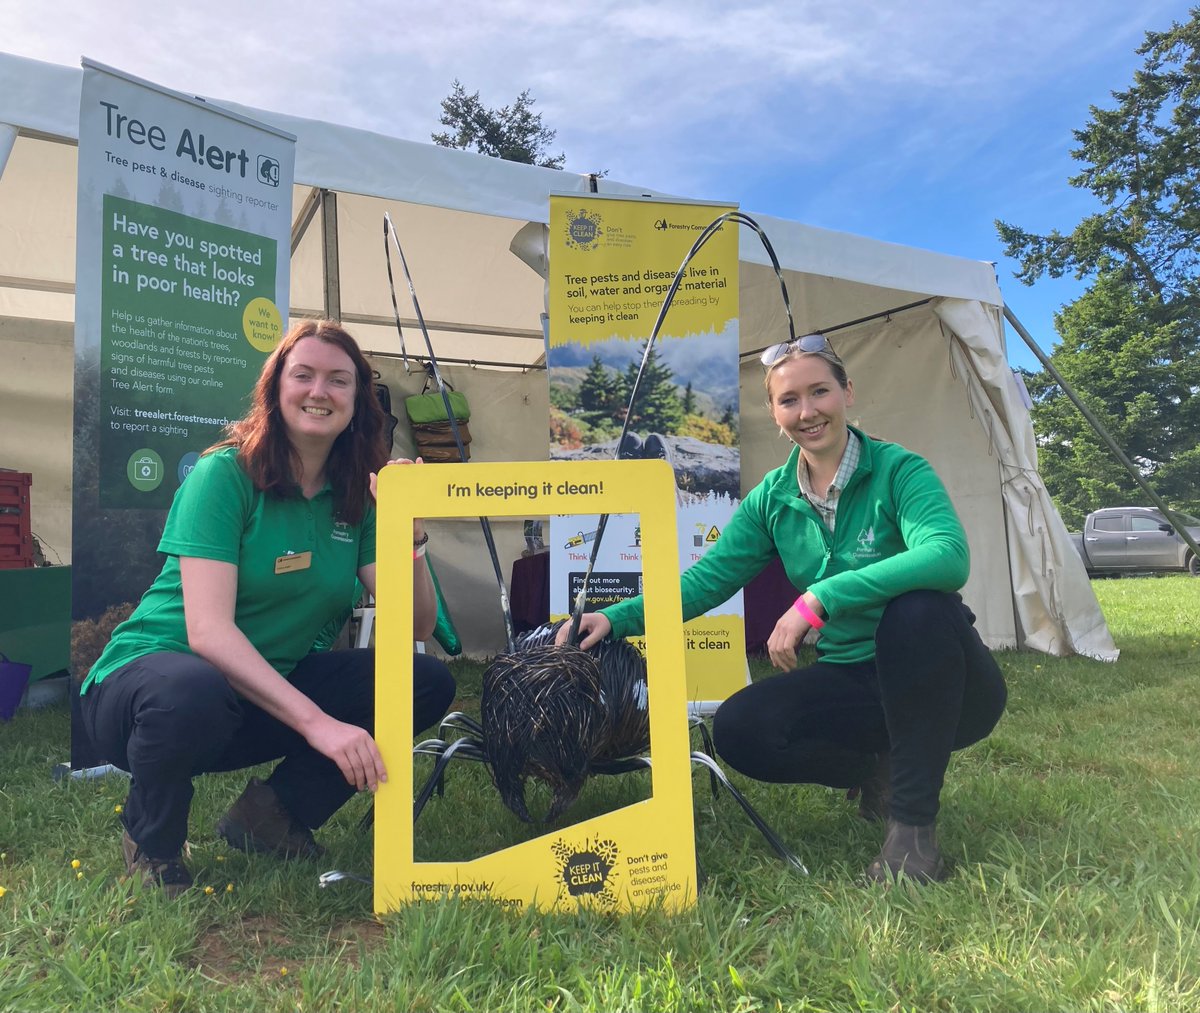 Our biosecurity team is alongside @Forest_Research at the Arb Show today and tomorrow @WestonbirtArb. Come along and find out more about how to help prevent the spread of tree pests and diseases. #TreeHealth